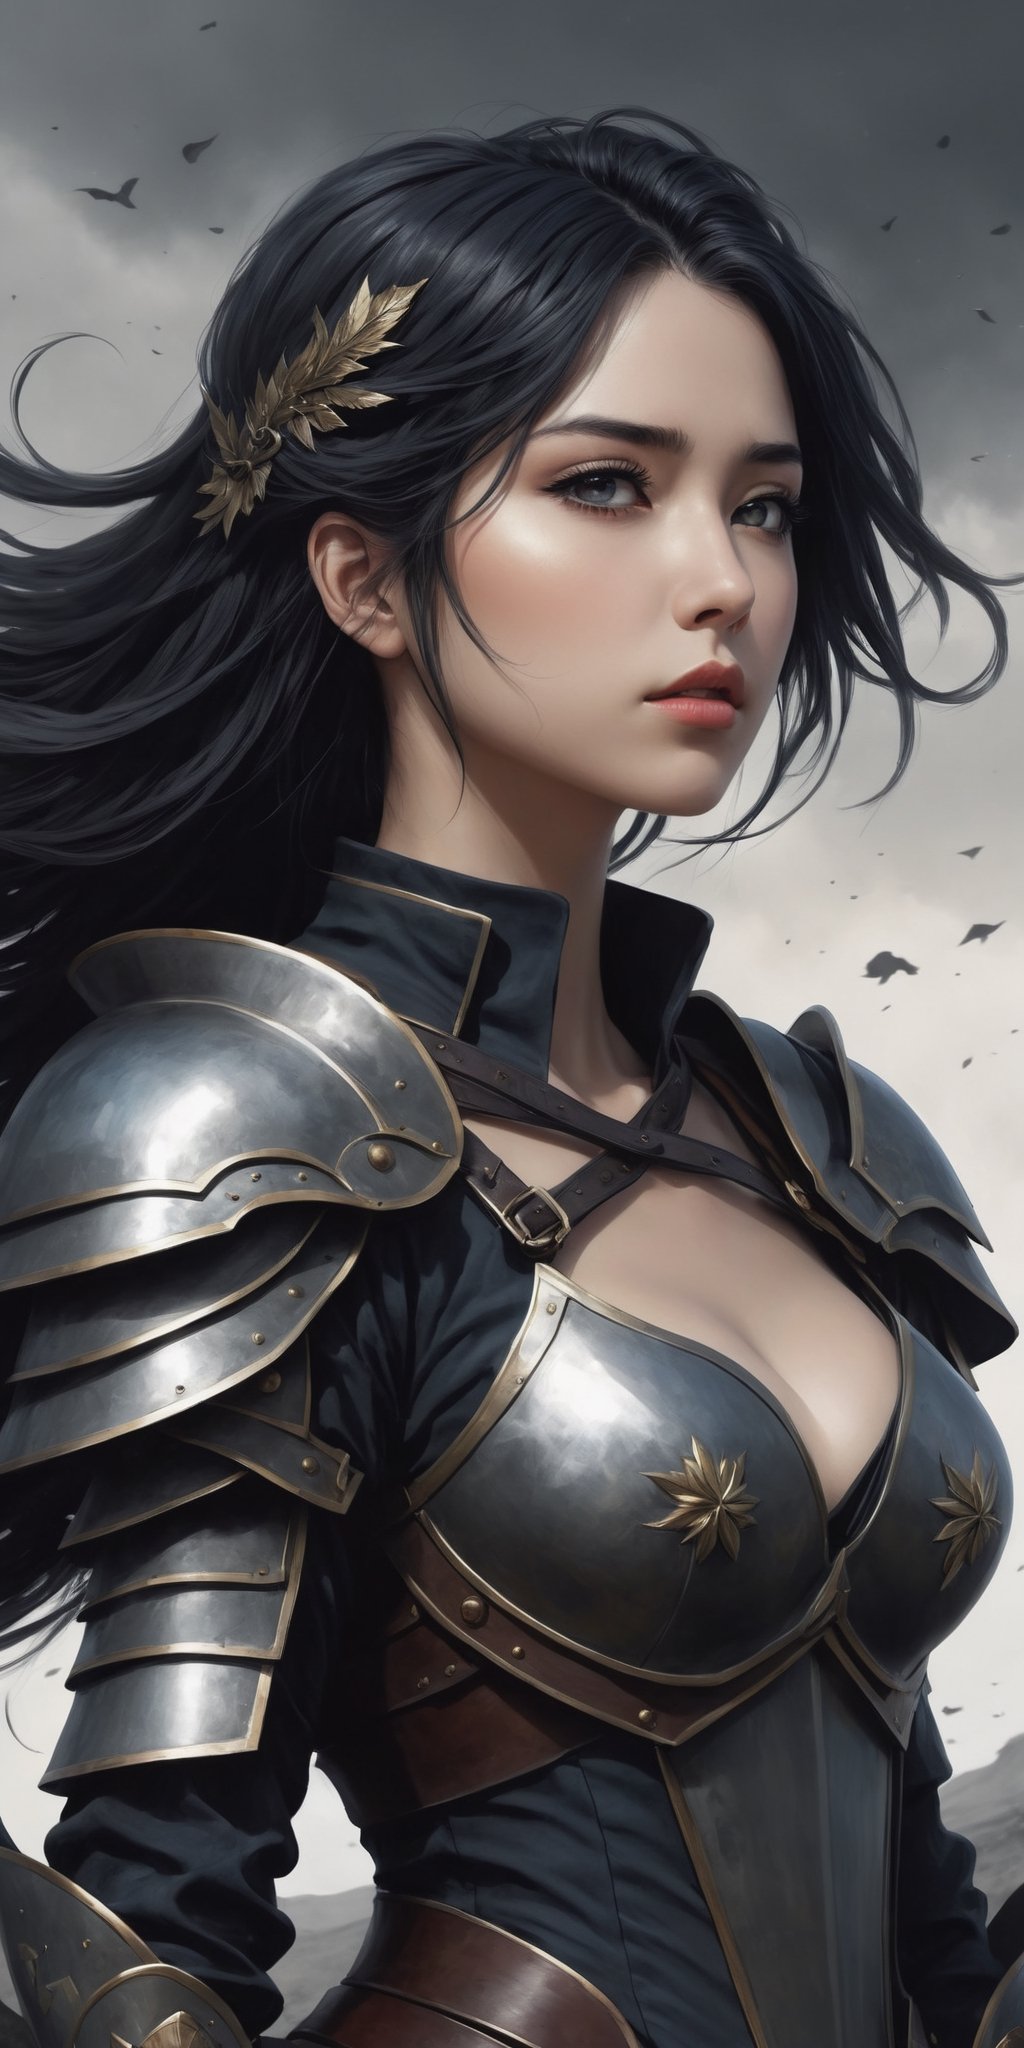 masterpiece, high_res, high quality, 
(side view:1.5), (full length view:1.5), epic fantasy illustration, merge detalization of manga style and realistic drawning of tradtiional arts, flat, dark colors palette, ink drawning, fiction,
incredibly beautiful and attractive woman weared armor, stands with her shoulders slumped, sad and exhausted, (very detailed outfit:1.3). (a woman must convey fragile beauty on whose shoulders lies the fate of the world and this oppresses her). the picture looks like a book cover. Use histories about feamle heroes. 
Surreal battlefield background, fusion cruelty of real war and symbolism of hero eposes, intricate and unexpected detailes. Dark and gothic. 
(detailed hair, detailed eyes, detailed hair:1.3)
